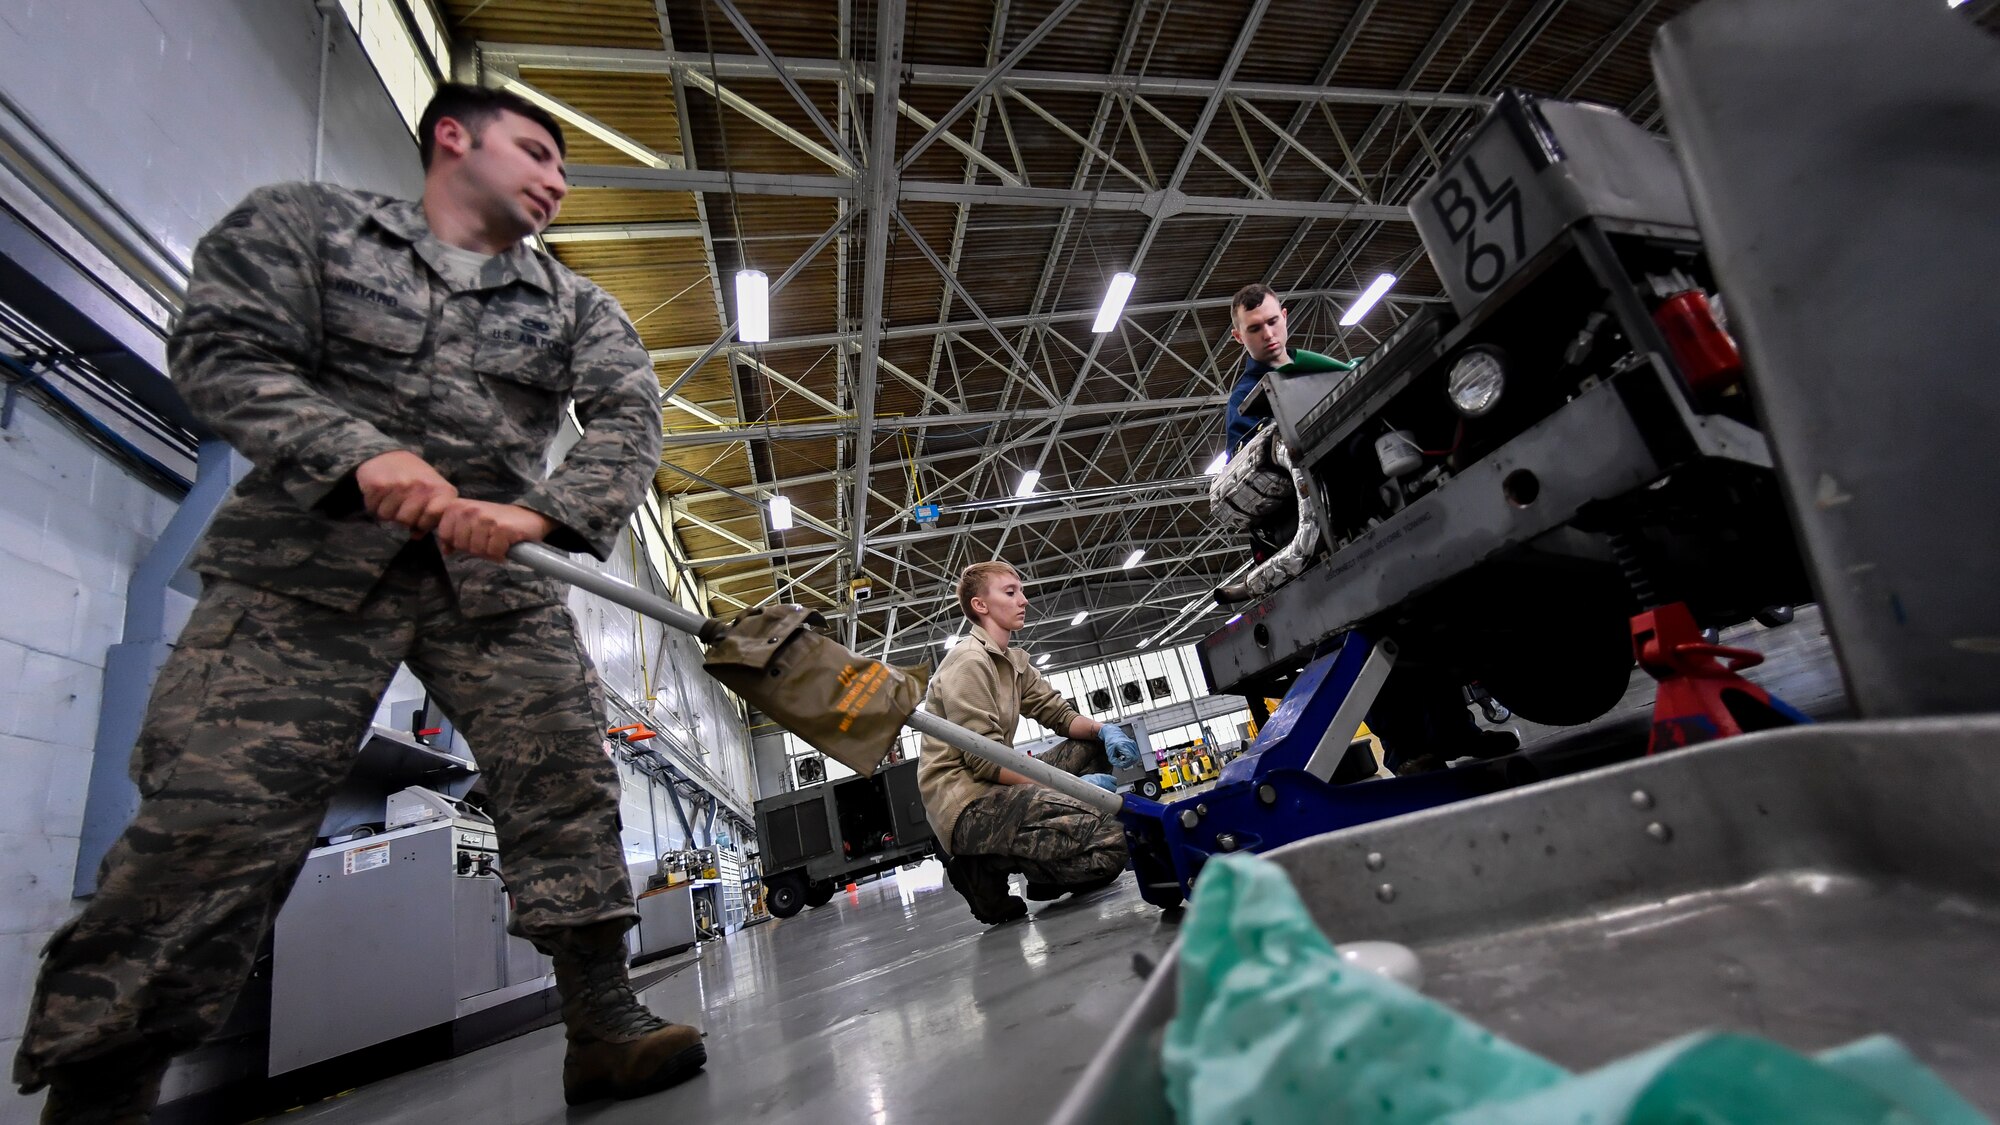 Aerospace ground equipment technicians lift a bomb loader vehicle prior to a tire change at Barksdale Air Force Base, La., Feb. 27, 2018. The annual safety inspection also allowed Airmen to inspect tires, gaskets and others parts of the vehicle.